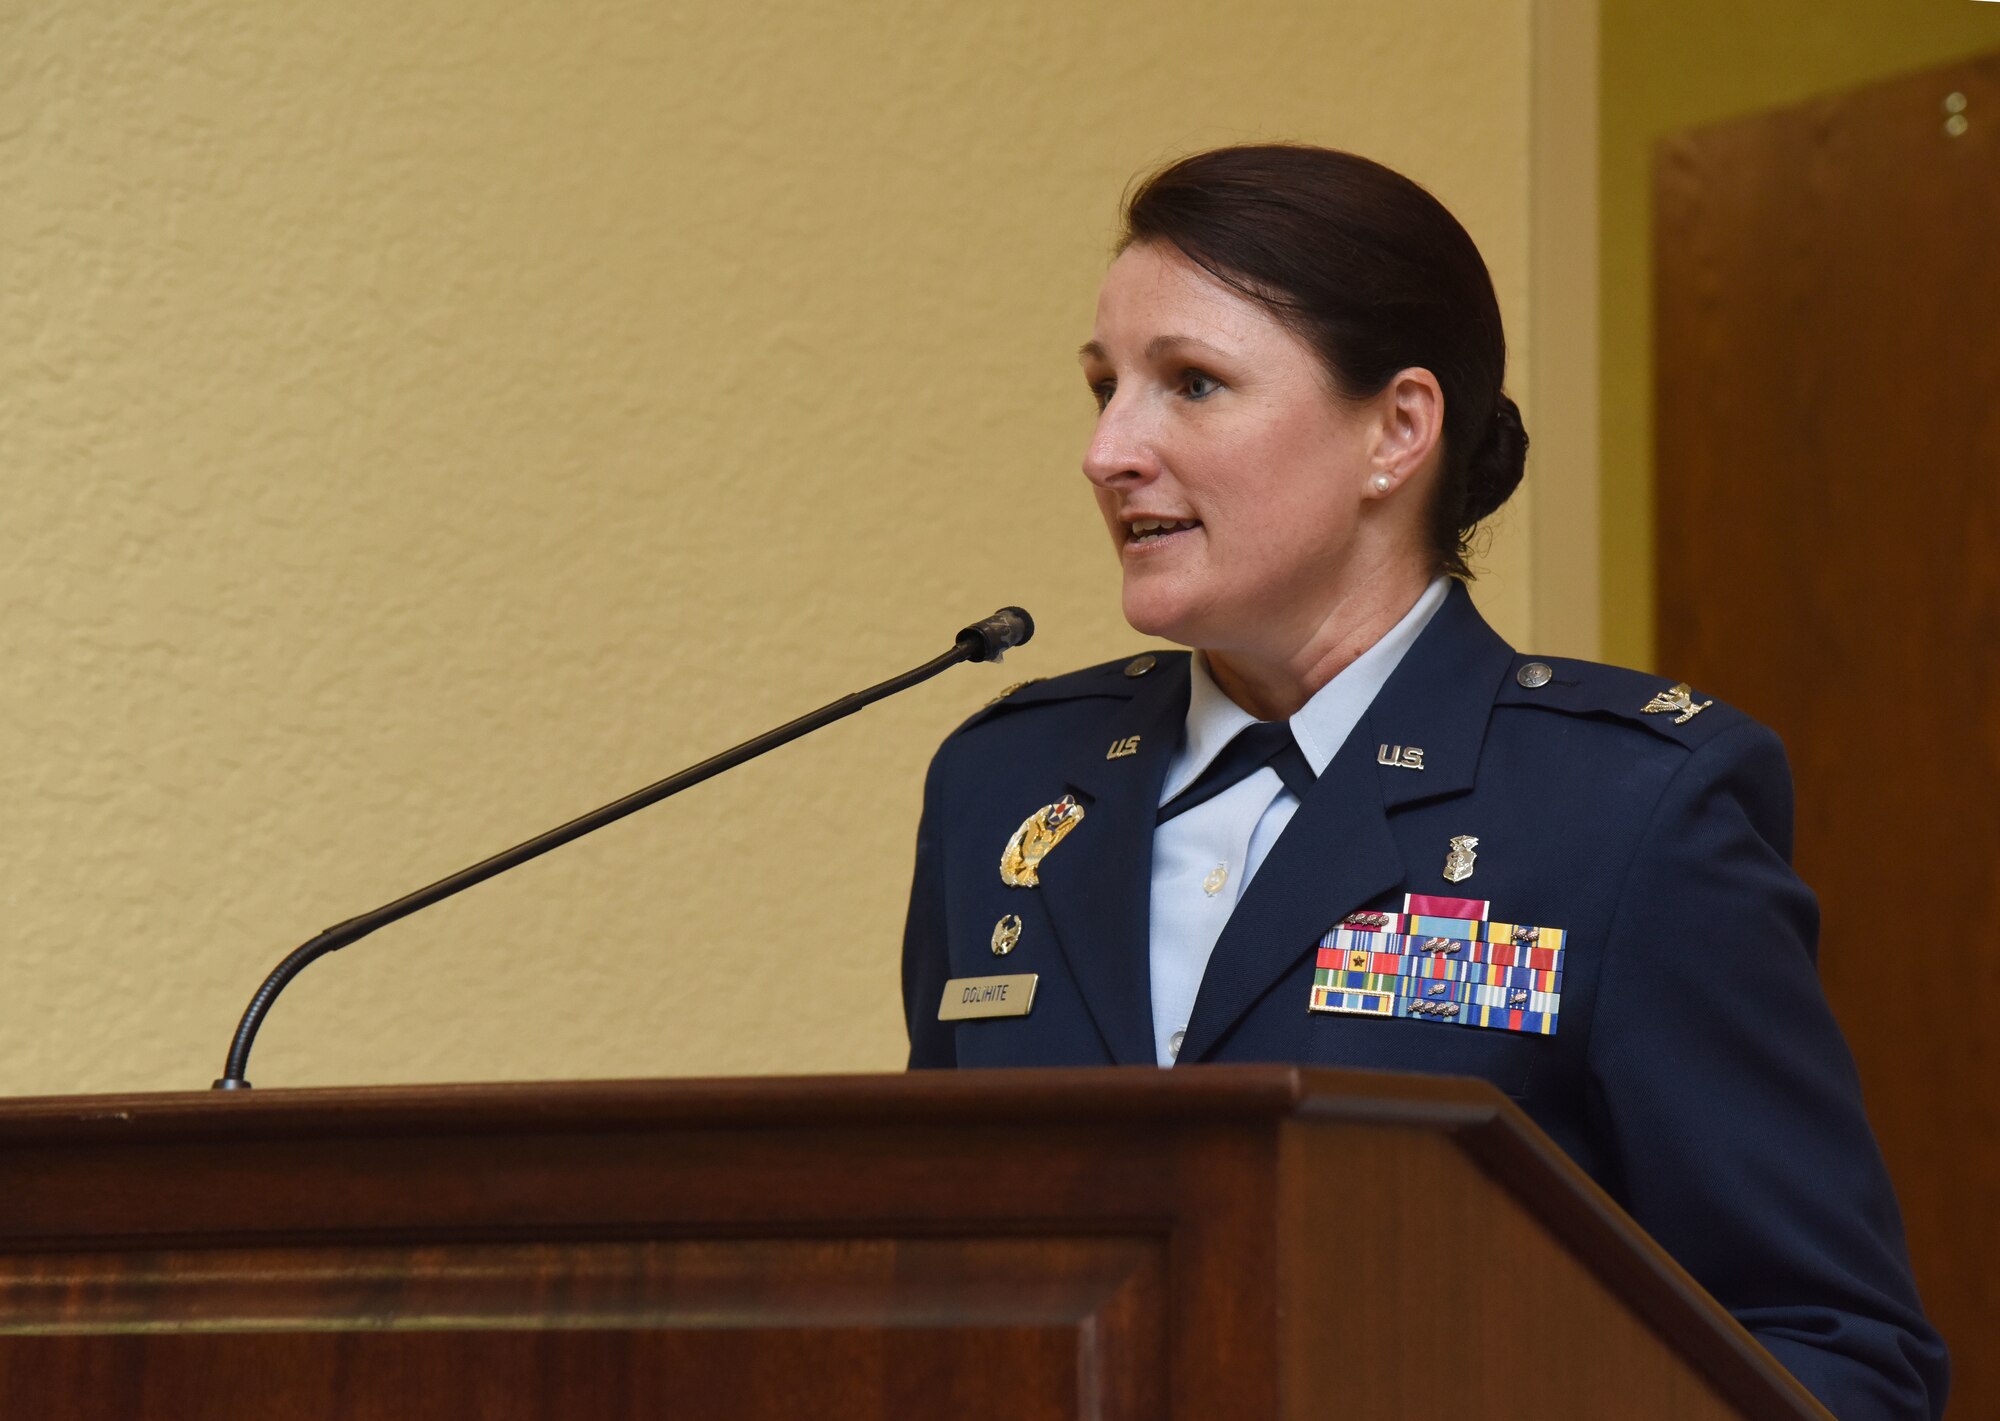 U.S. Air Force Col. Beatrice Dolihite, incoming 81st Medical Group commander, delivers remarks during the 81st MDG change of command ceremony in the Bay Breeze Event Center at Keesler Air Force Base, Mississippi, June 22, 2018. Dolihite assumed command from Col. Jeannine Ryder, outgoing 81st MDG commander. (U.S. Air Force photo by Kemberly Groue)